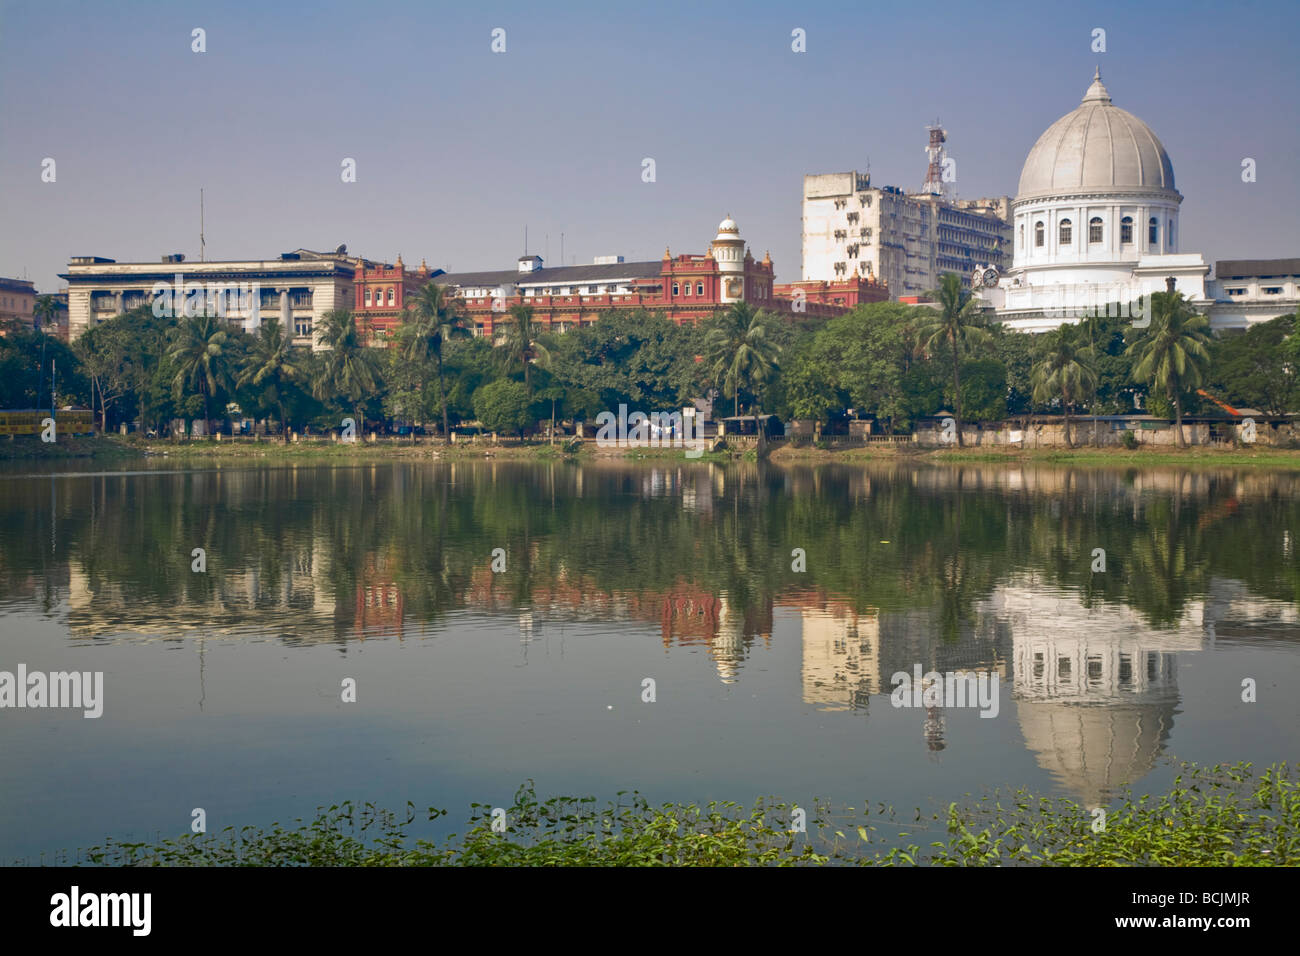 India, West Bengal, Kolkata, Calcutta, Dalhousie Square, General Post Office and Customs house, Central reservoir lake - tank Stock Photo